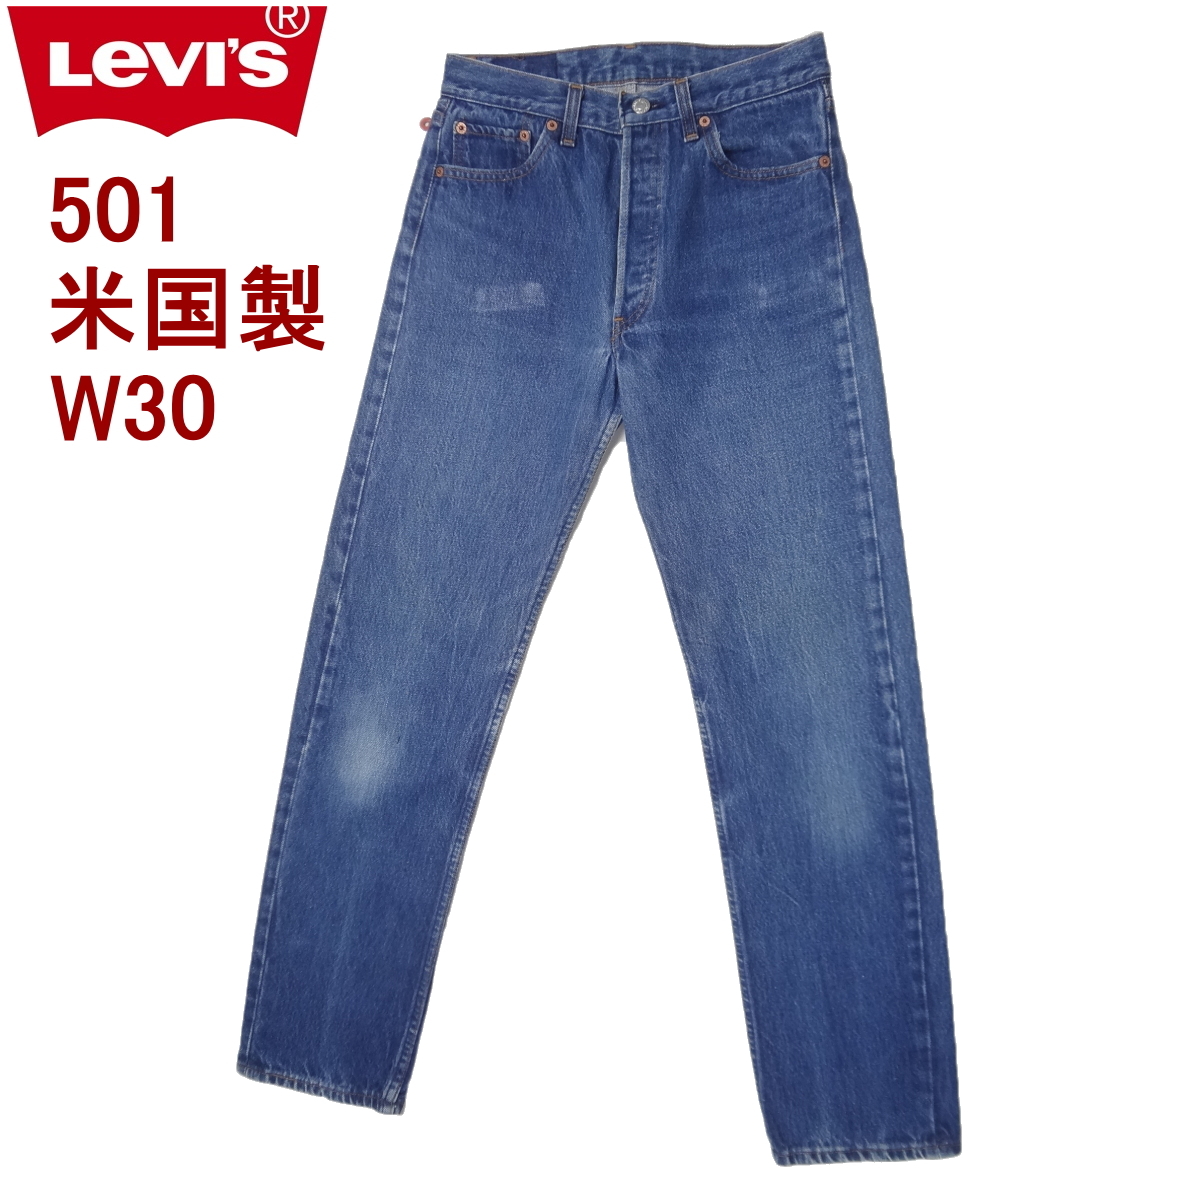 W30インチ リーバイス 米国製 501 ジーンズ 古着 デニム levi's MADE IN THE USA_画像1